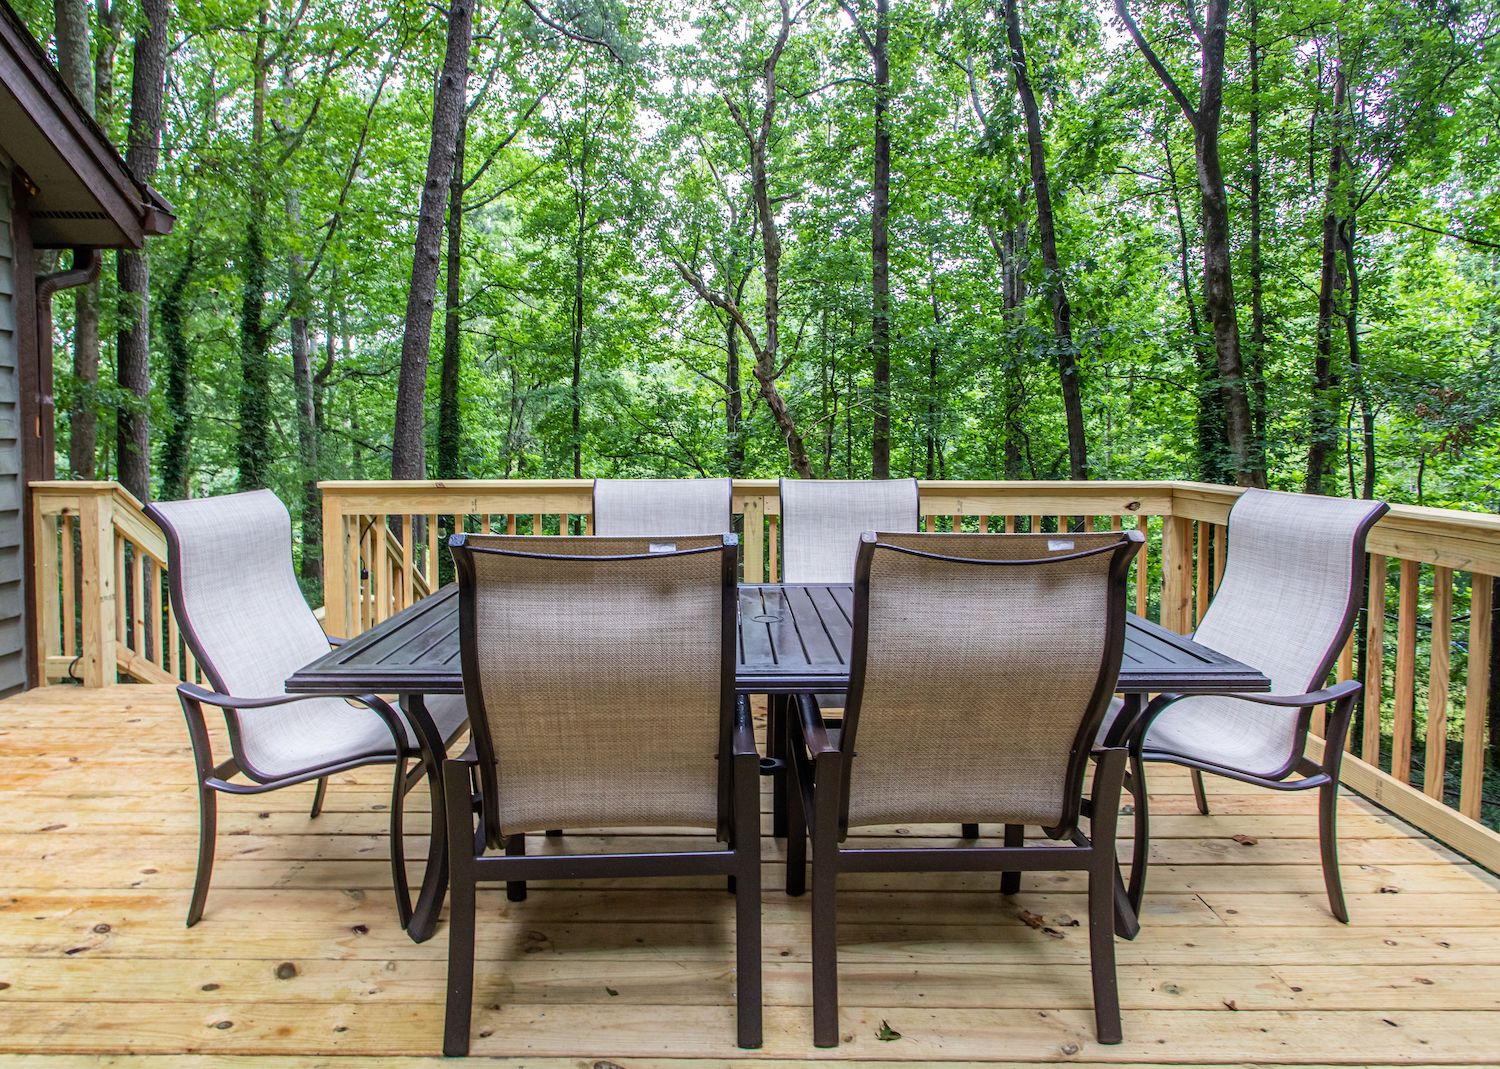 Outdoor wooden deck with table and chairs.